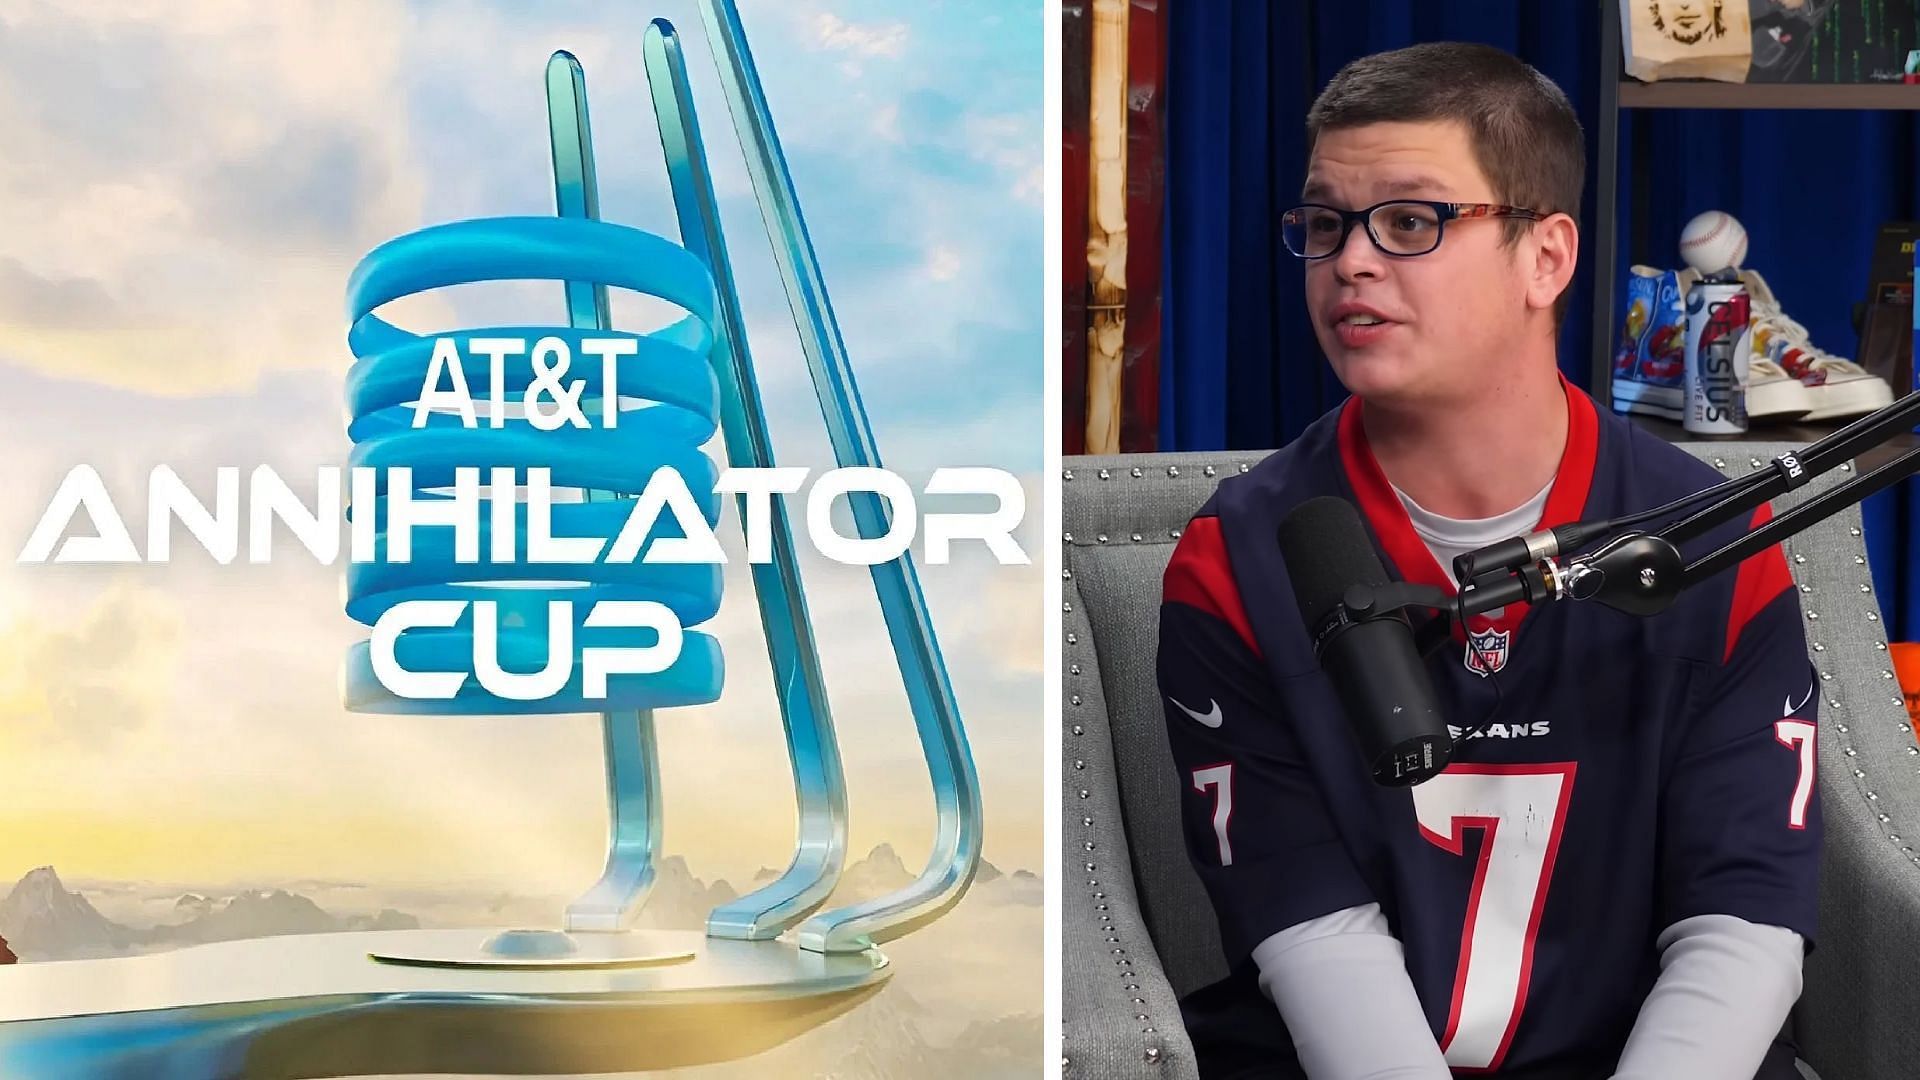 Sketch rages while playing in the AT&amp;T Annihilator Cup (Image via AT&amp;T, Theo Von/YouTube)